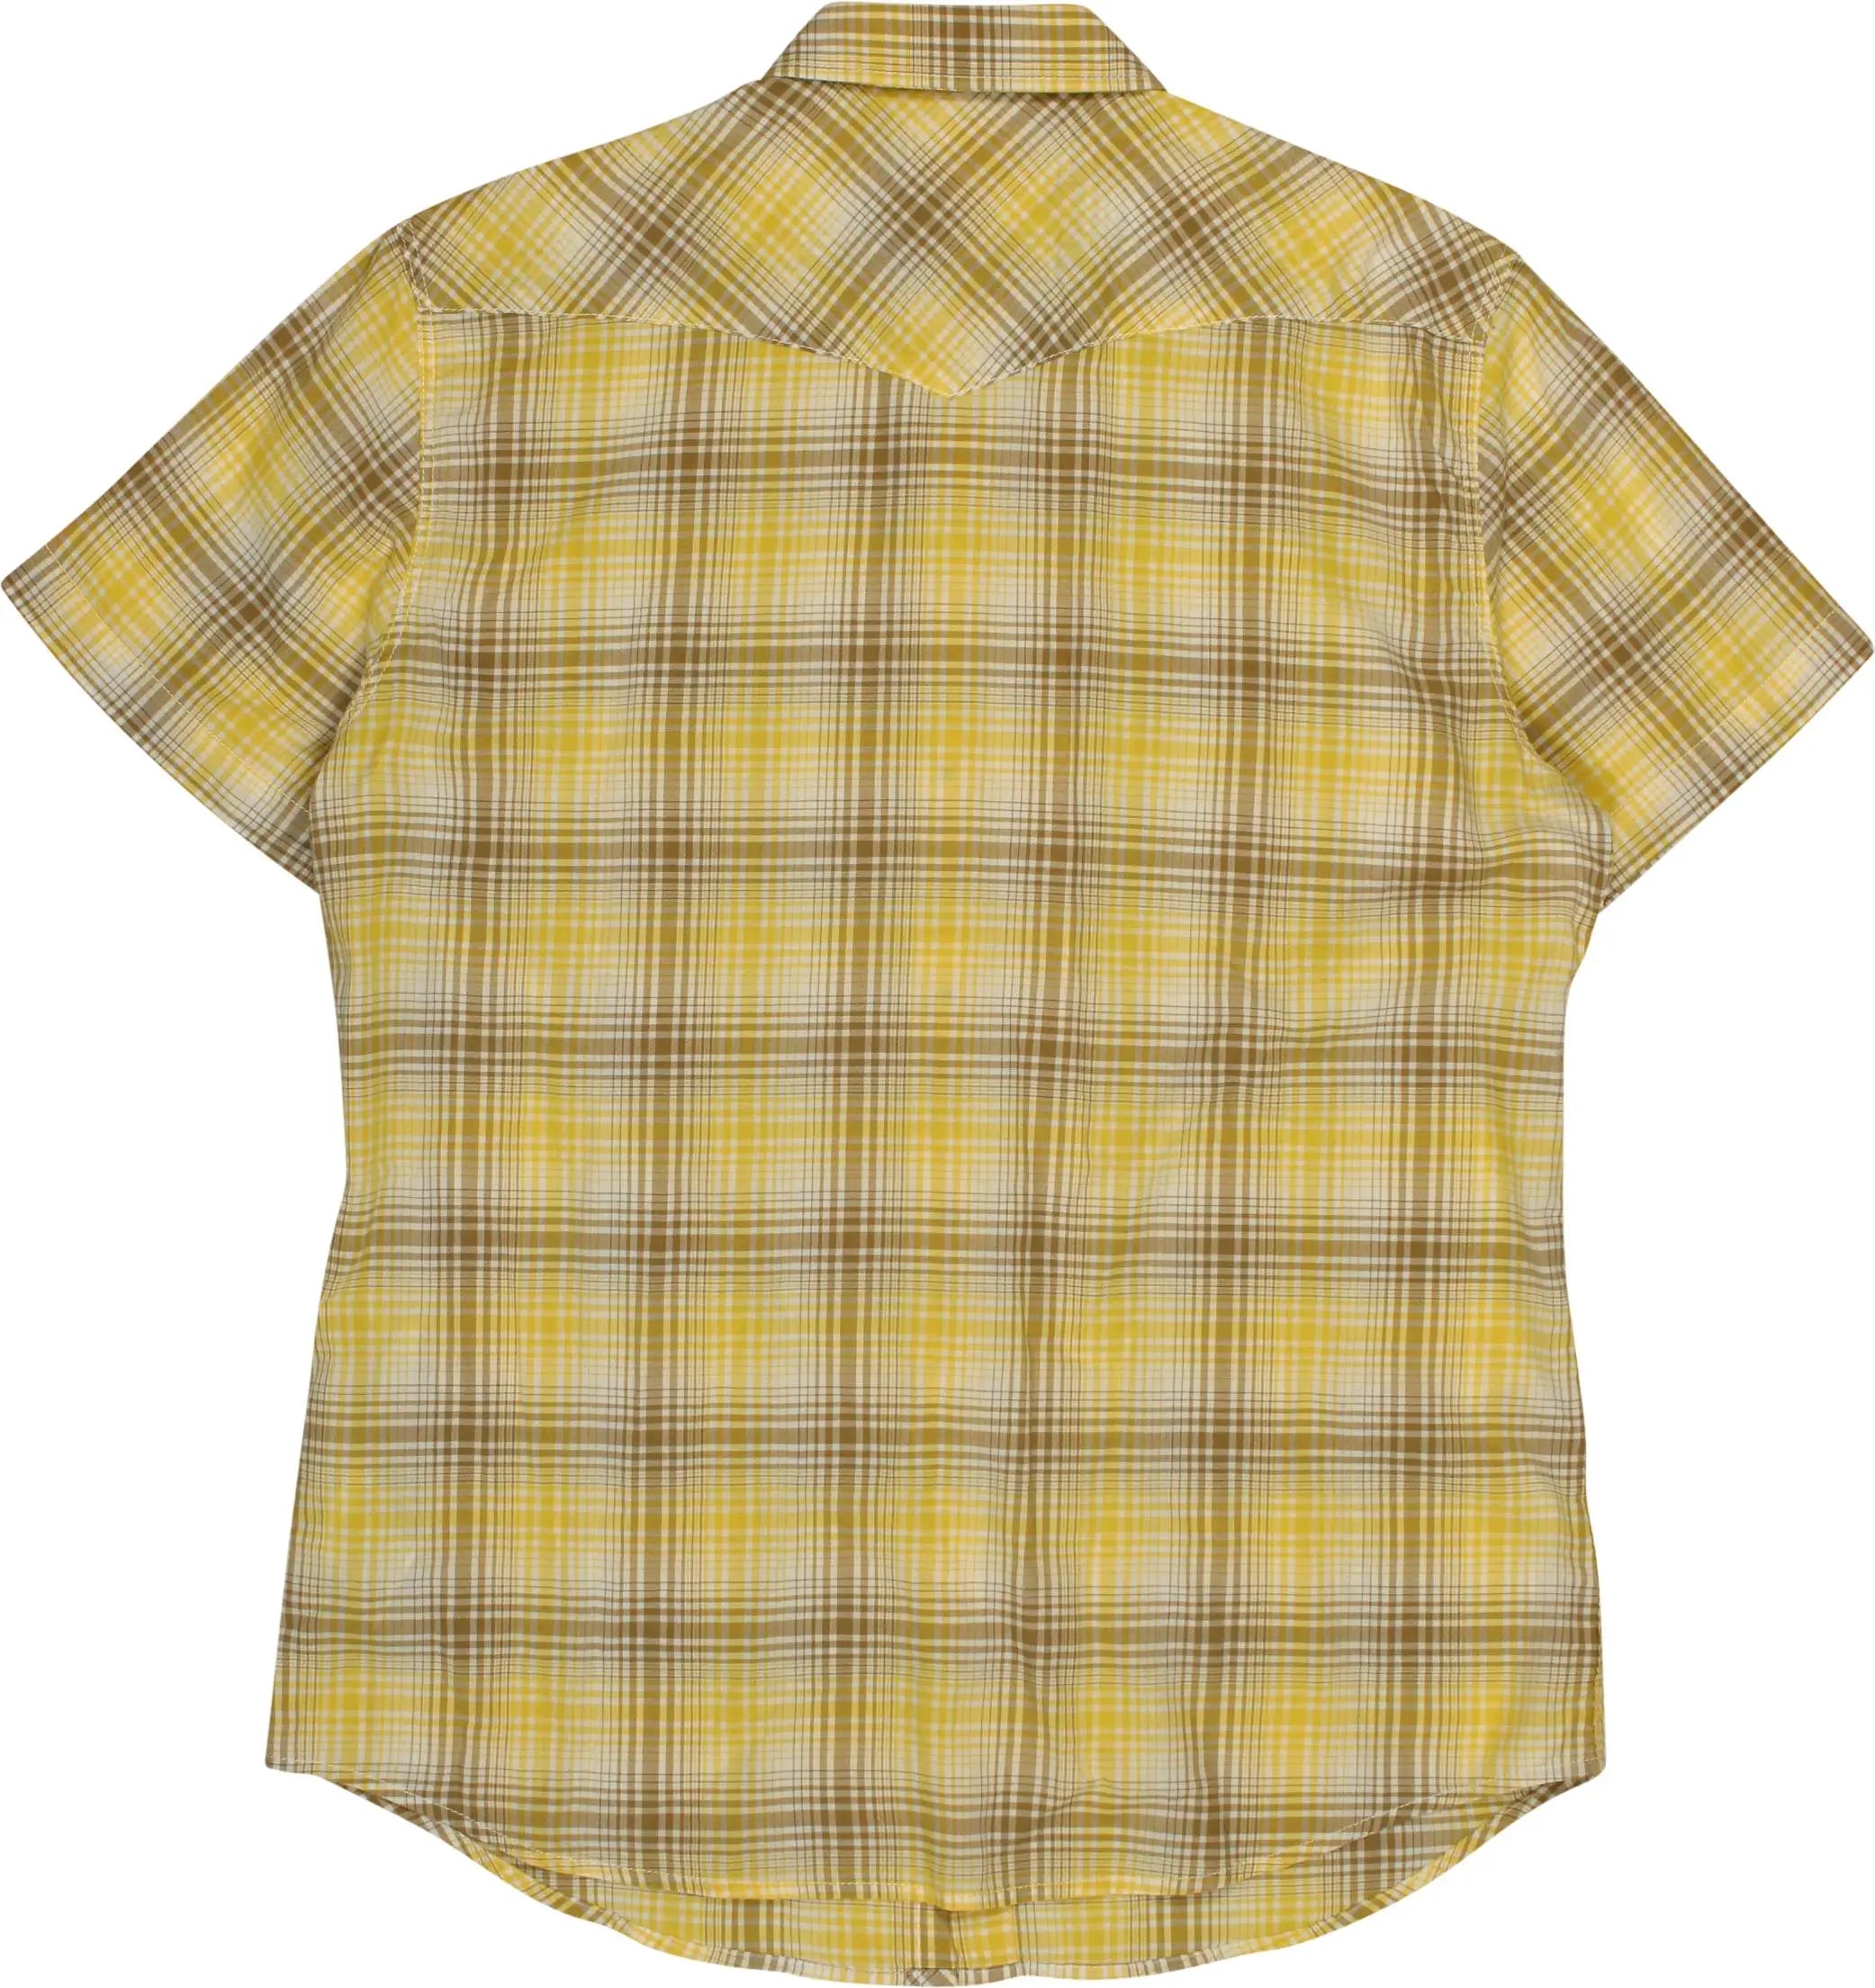 Levi's - Checkered Shirt- ThriftTale.com - Vintage and second handclothing